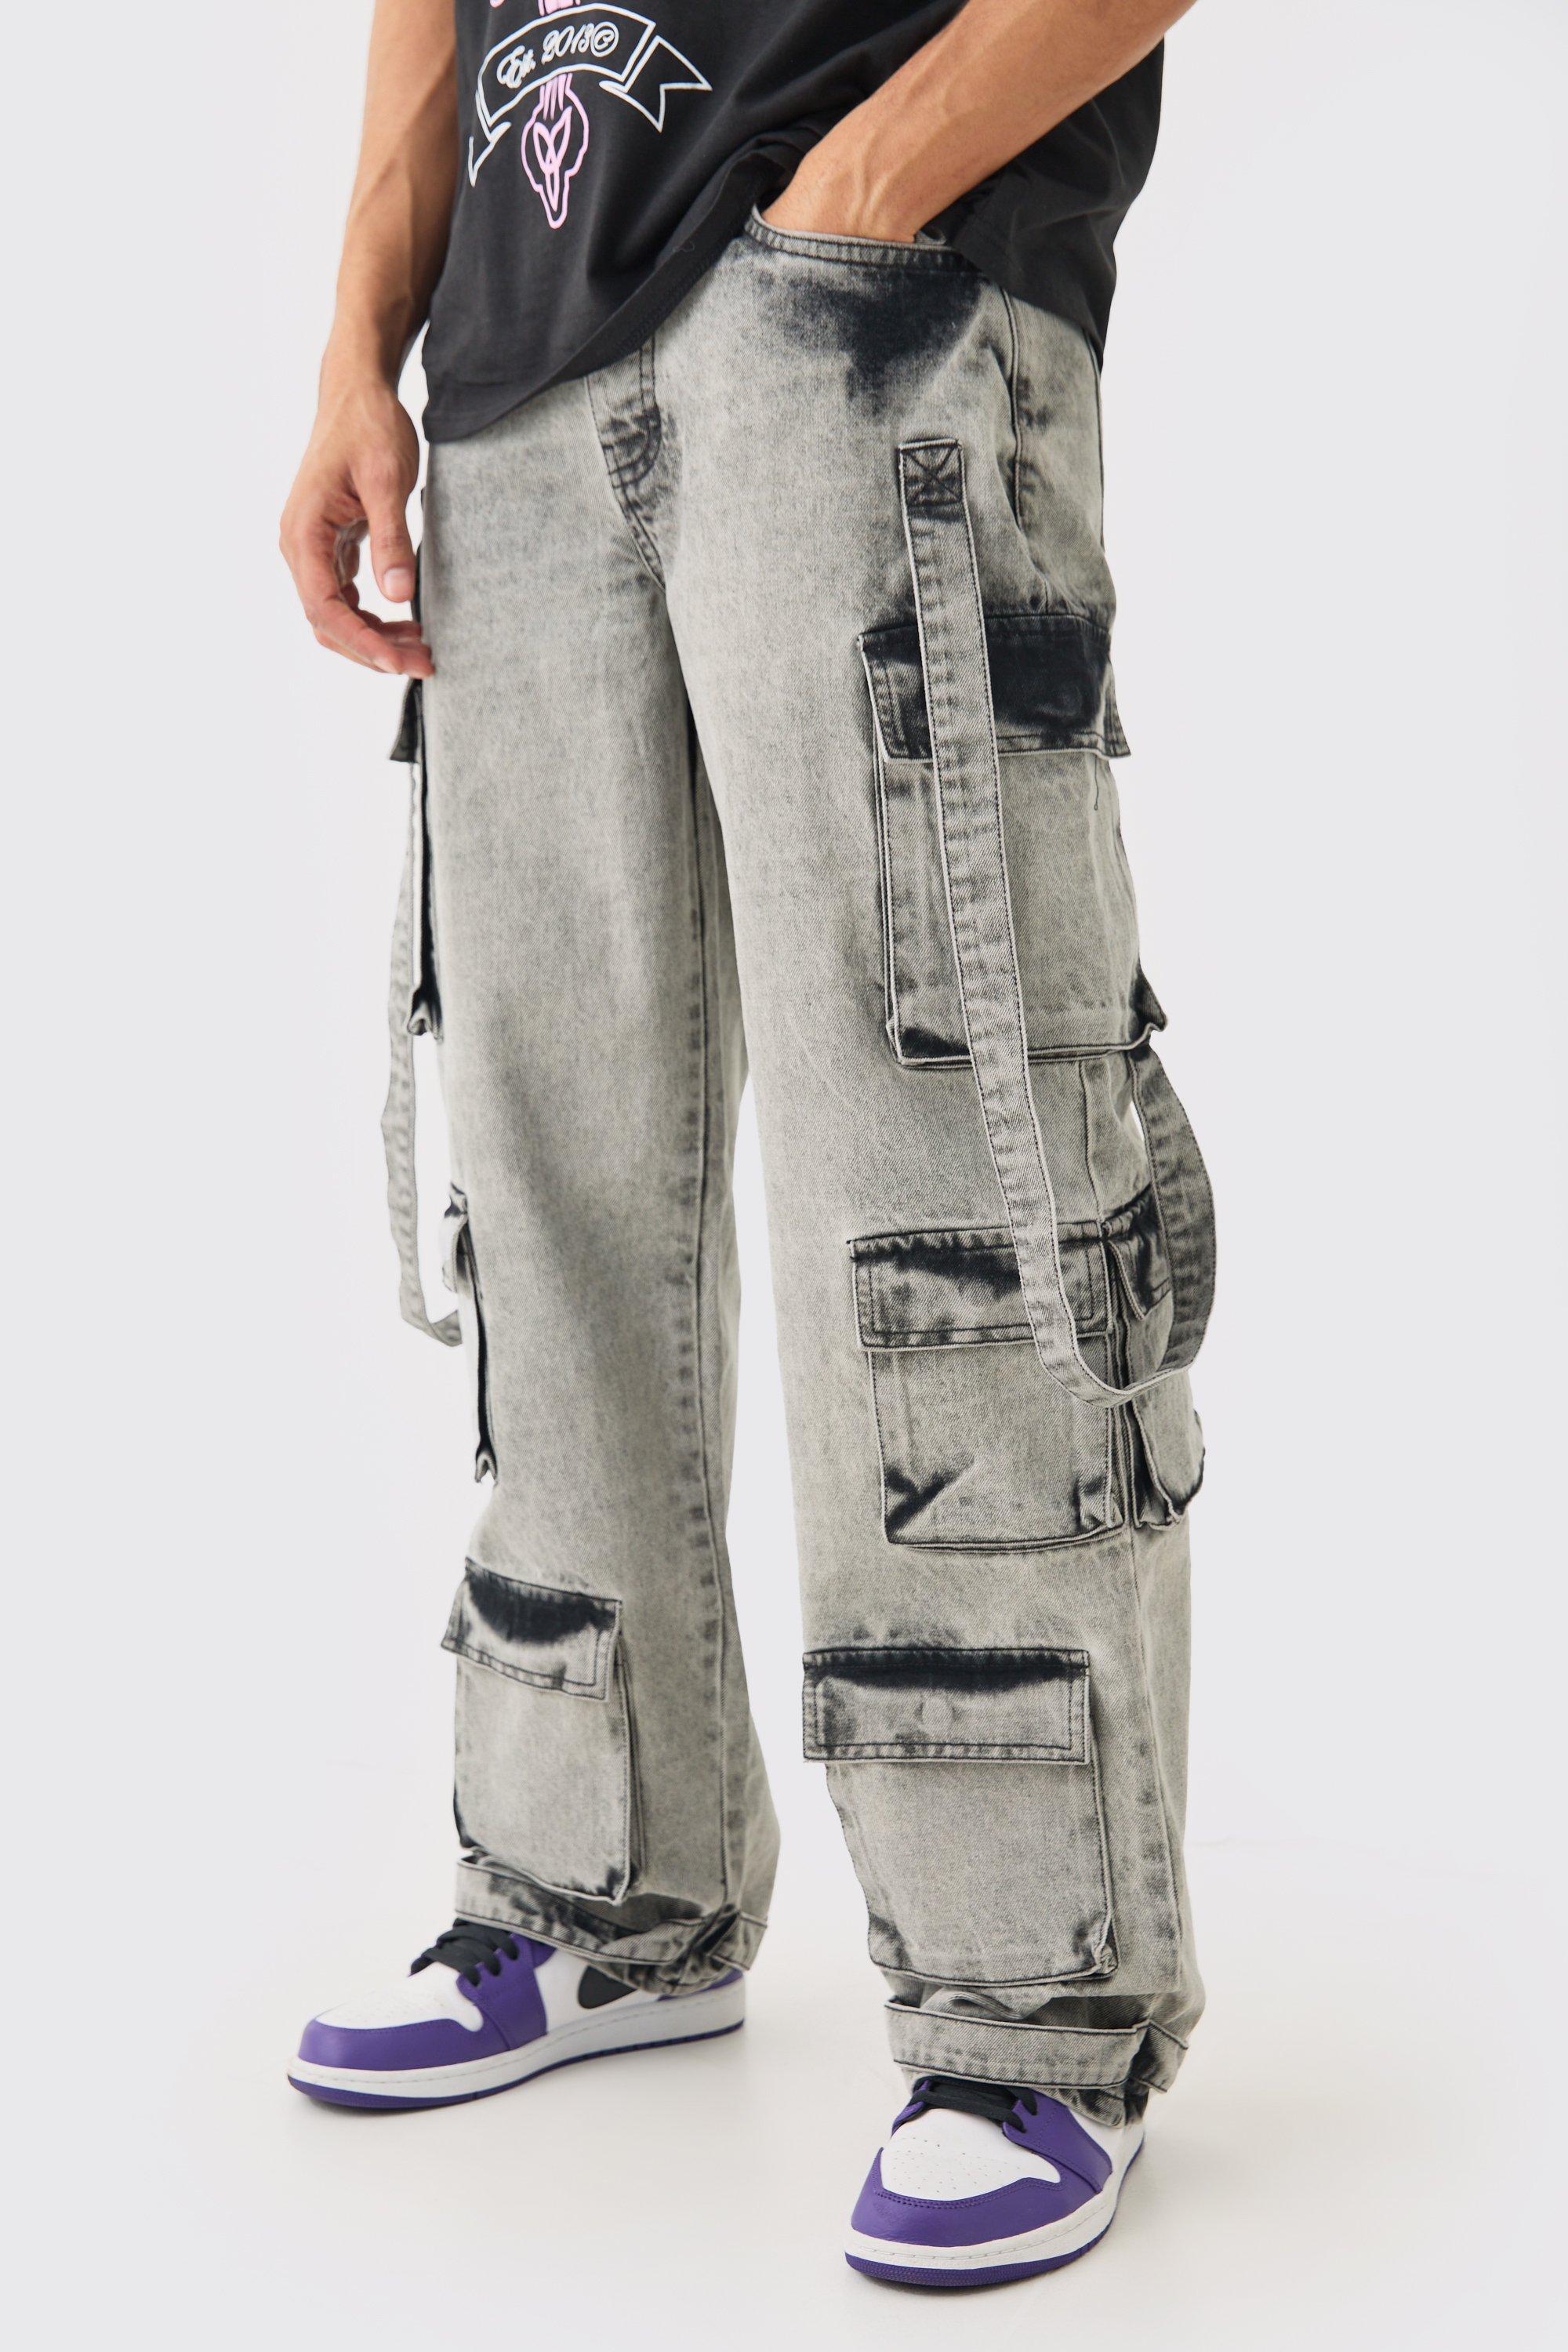 Image of Baggy Rigid Multi Pocket Acid Washed Jeans In Charcoal, Grigio